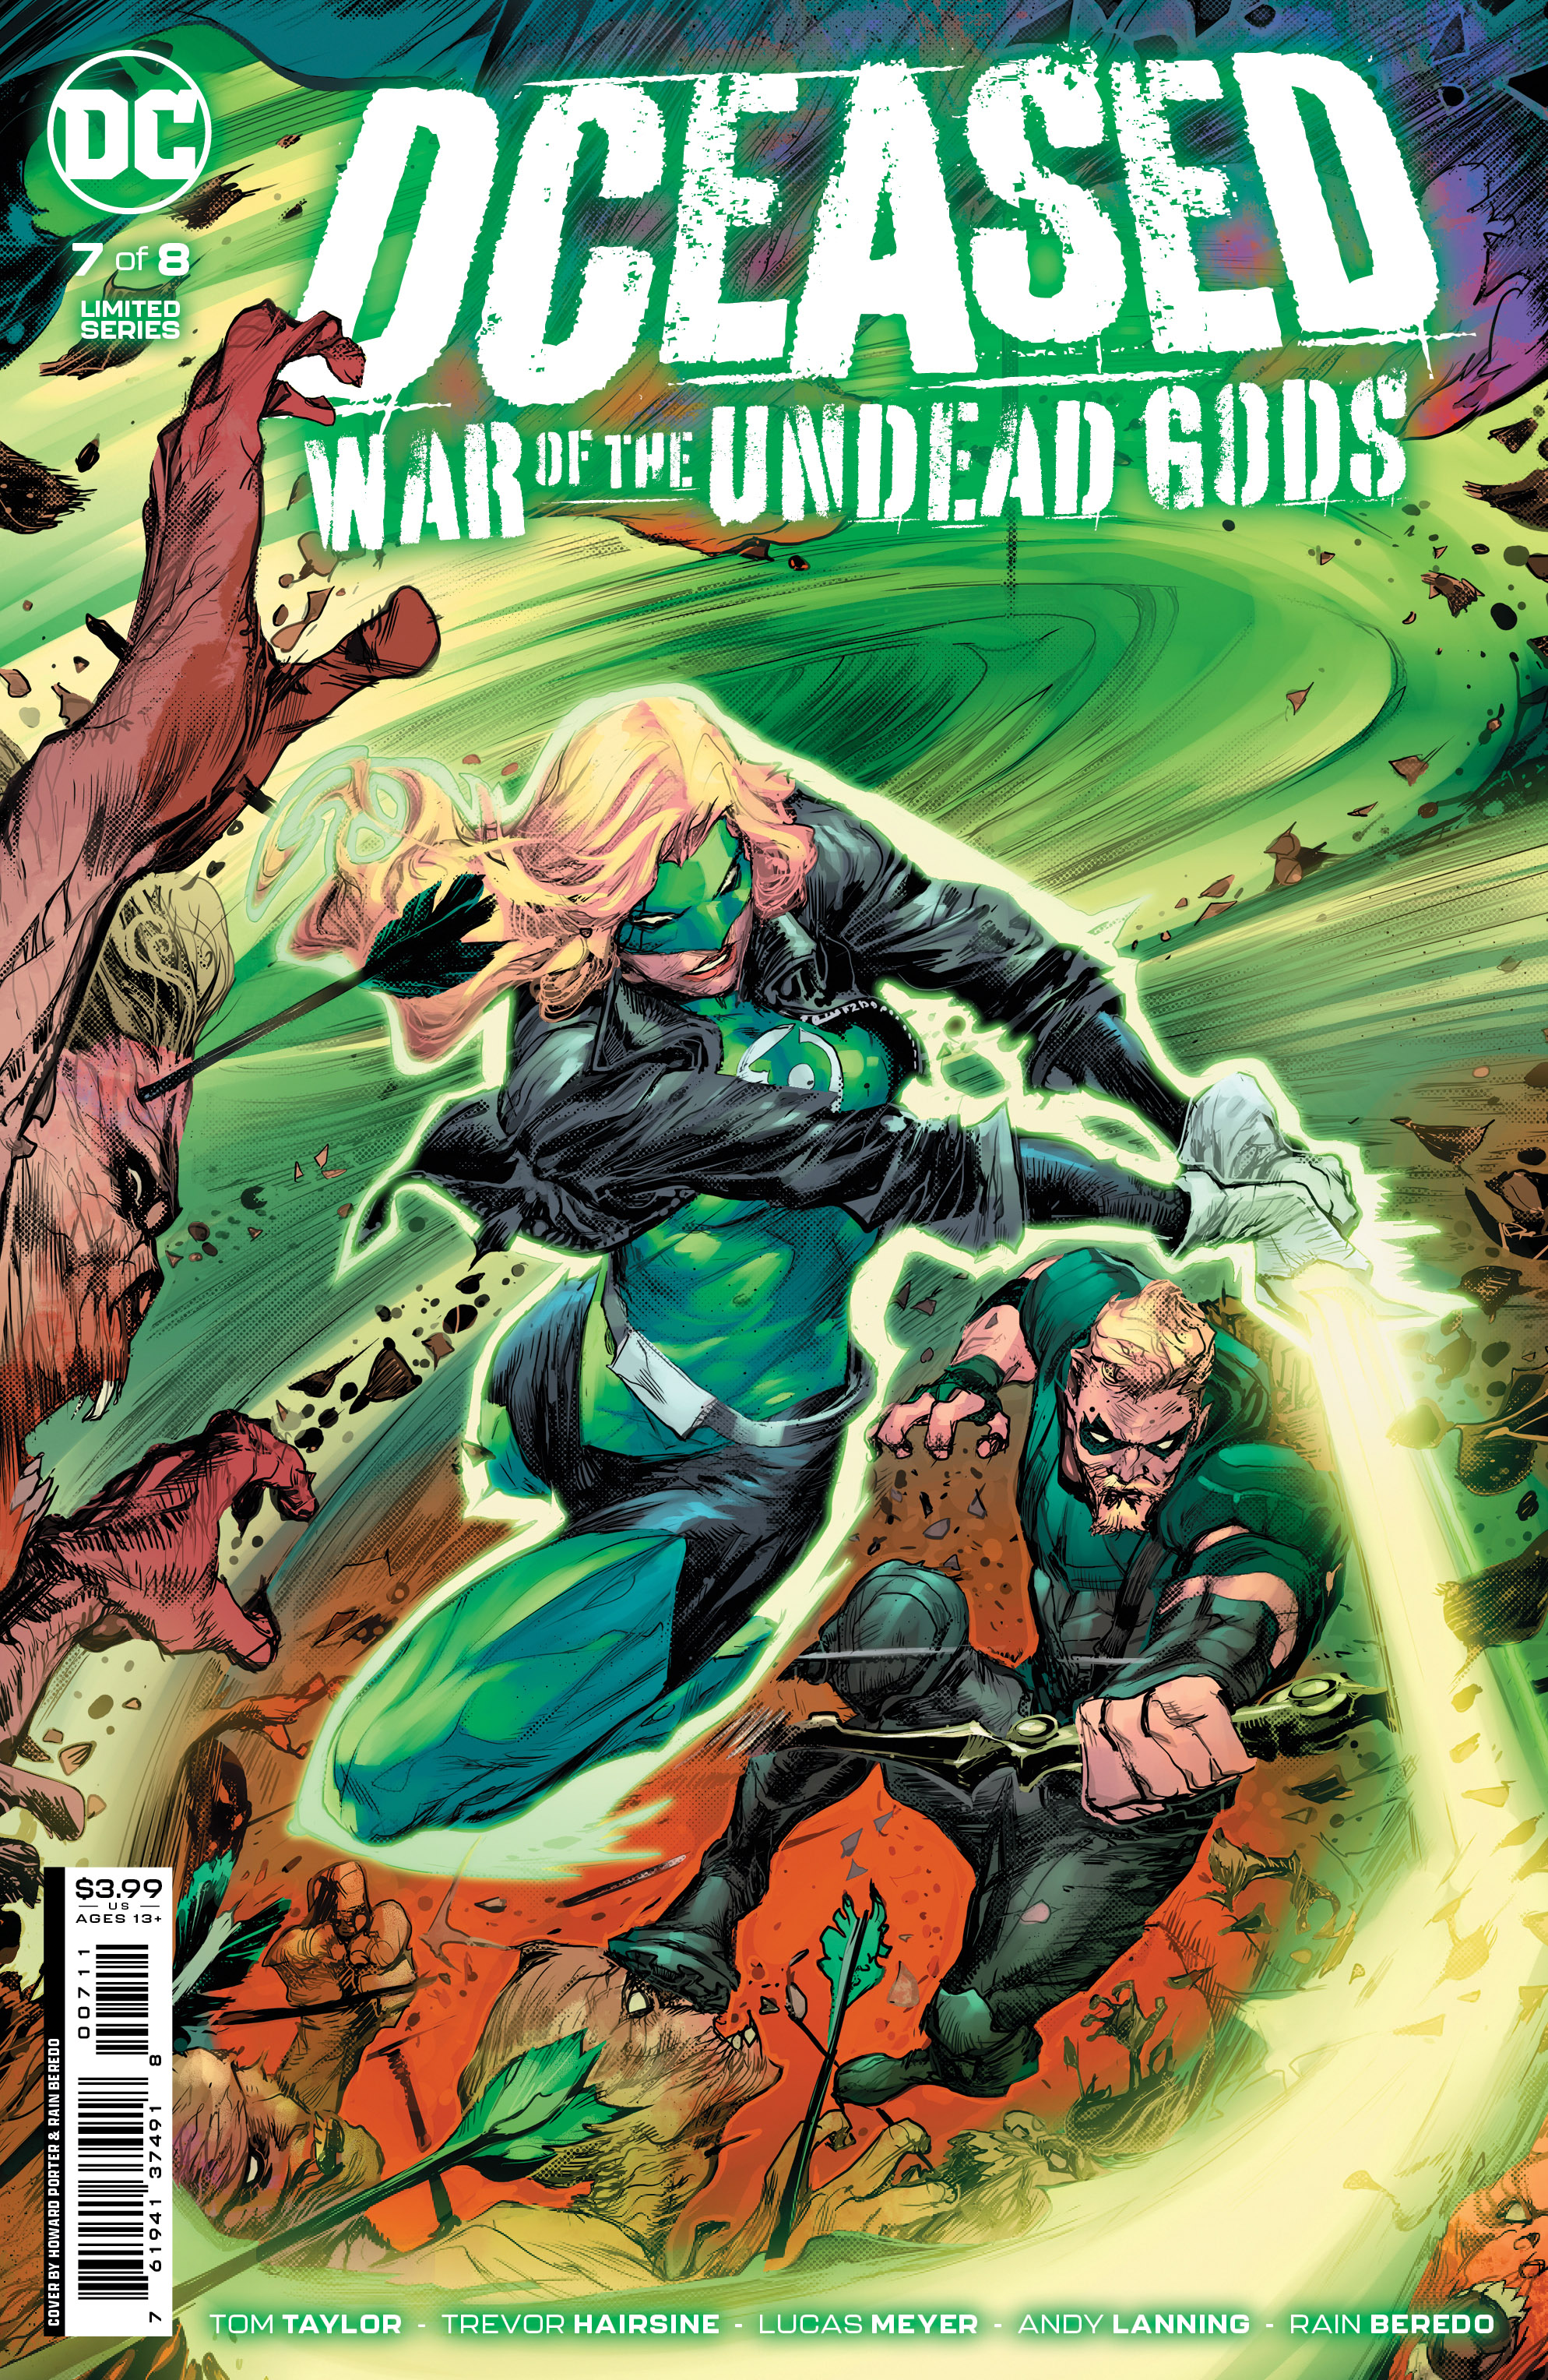 DCeased War of The Undead Gods #7 Cover A Howard Porter (Of 8)